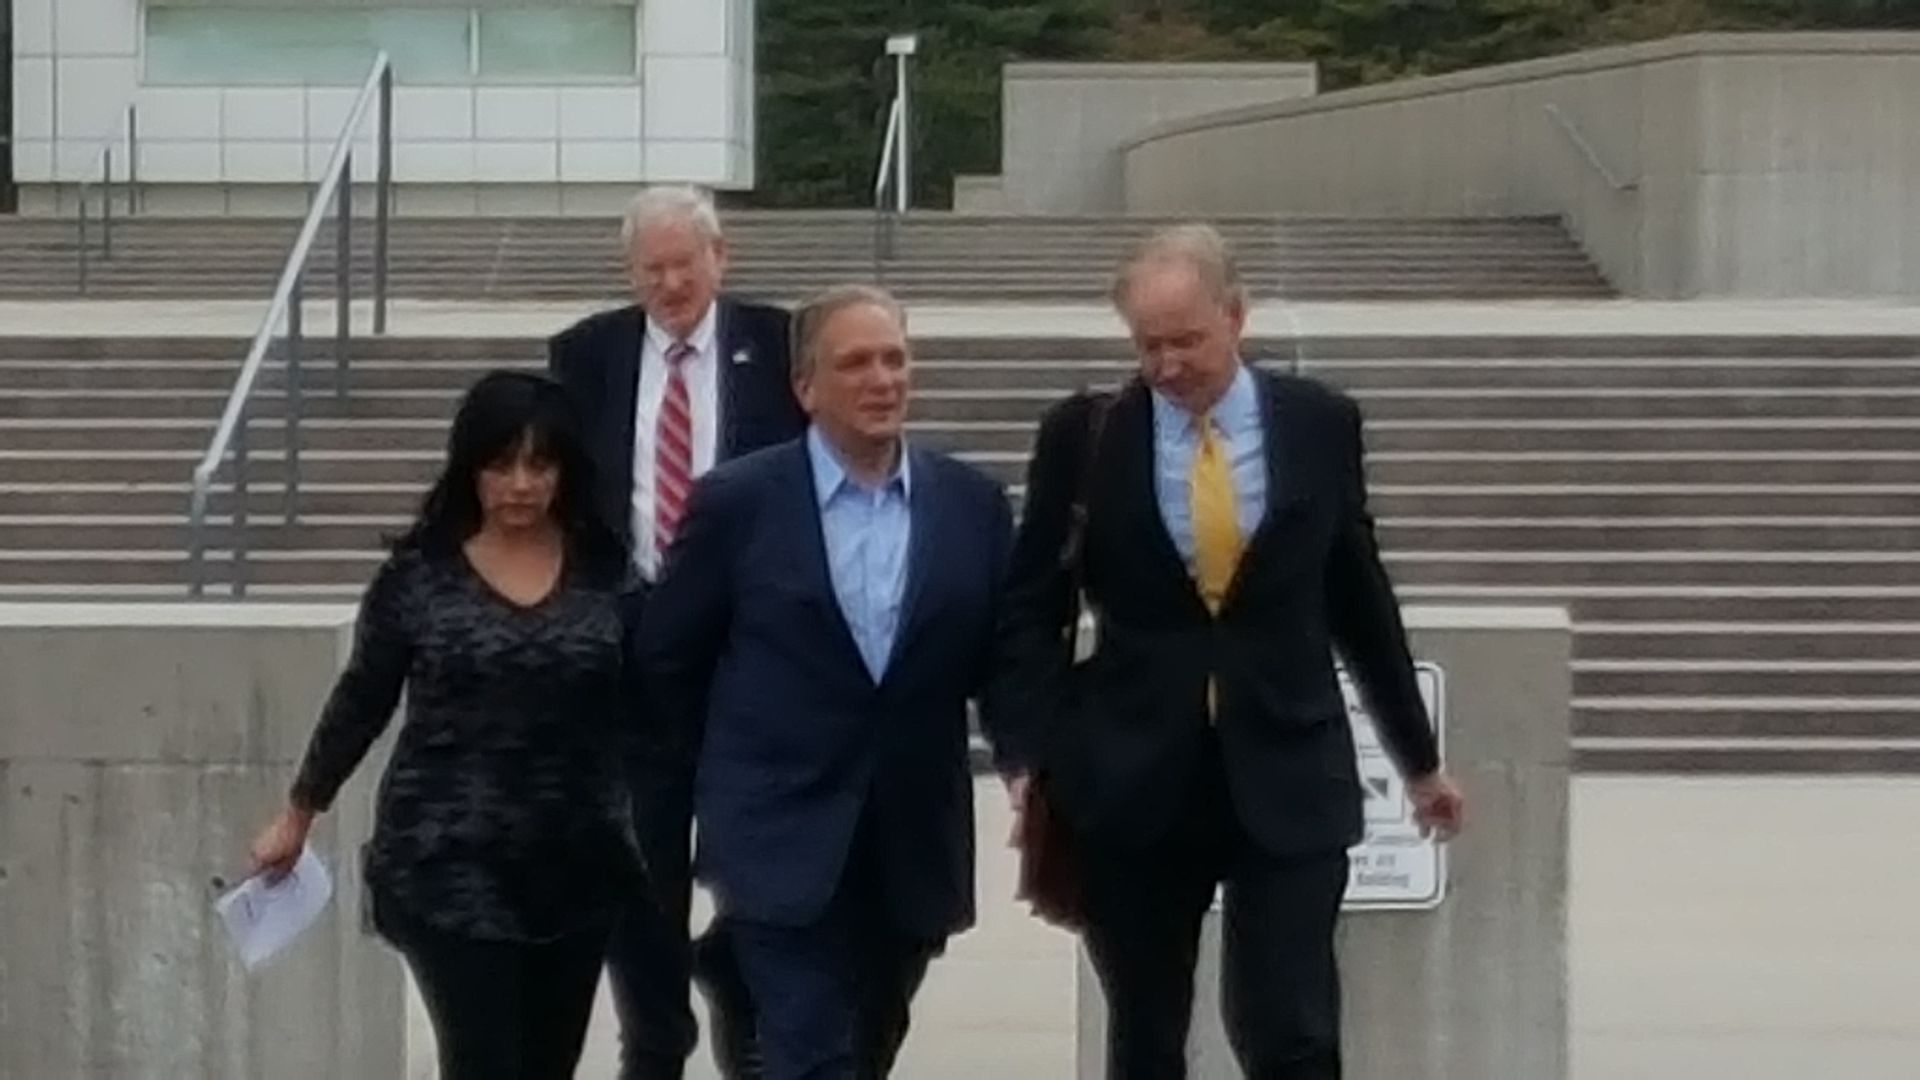 Nassau County Executive Edward Mangano, as seen leaving the federal courthouse in Central Islip. (Photo by Joe Nikic)